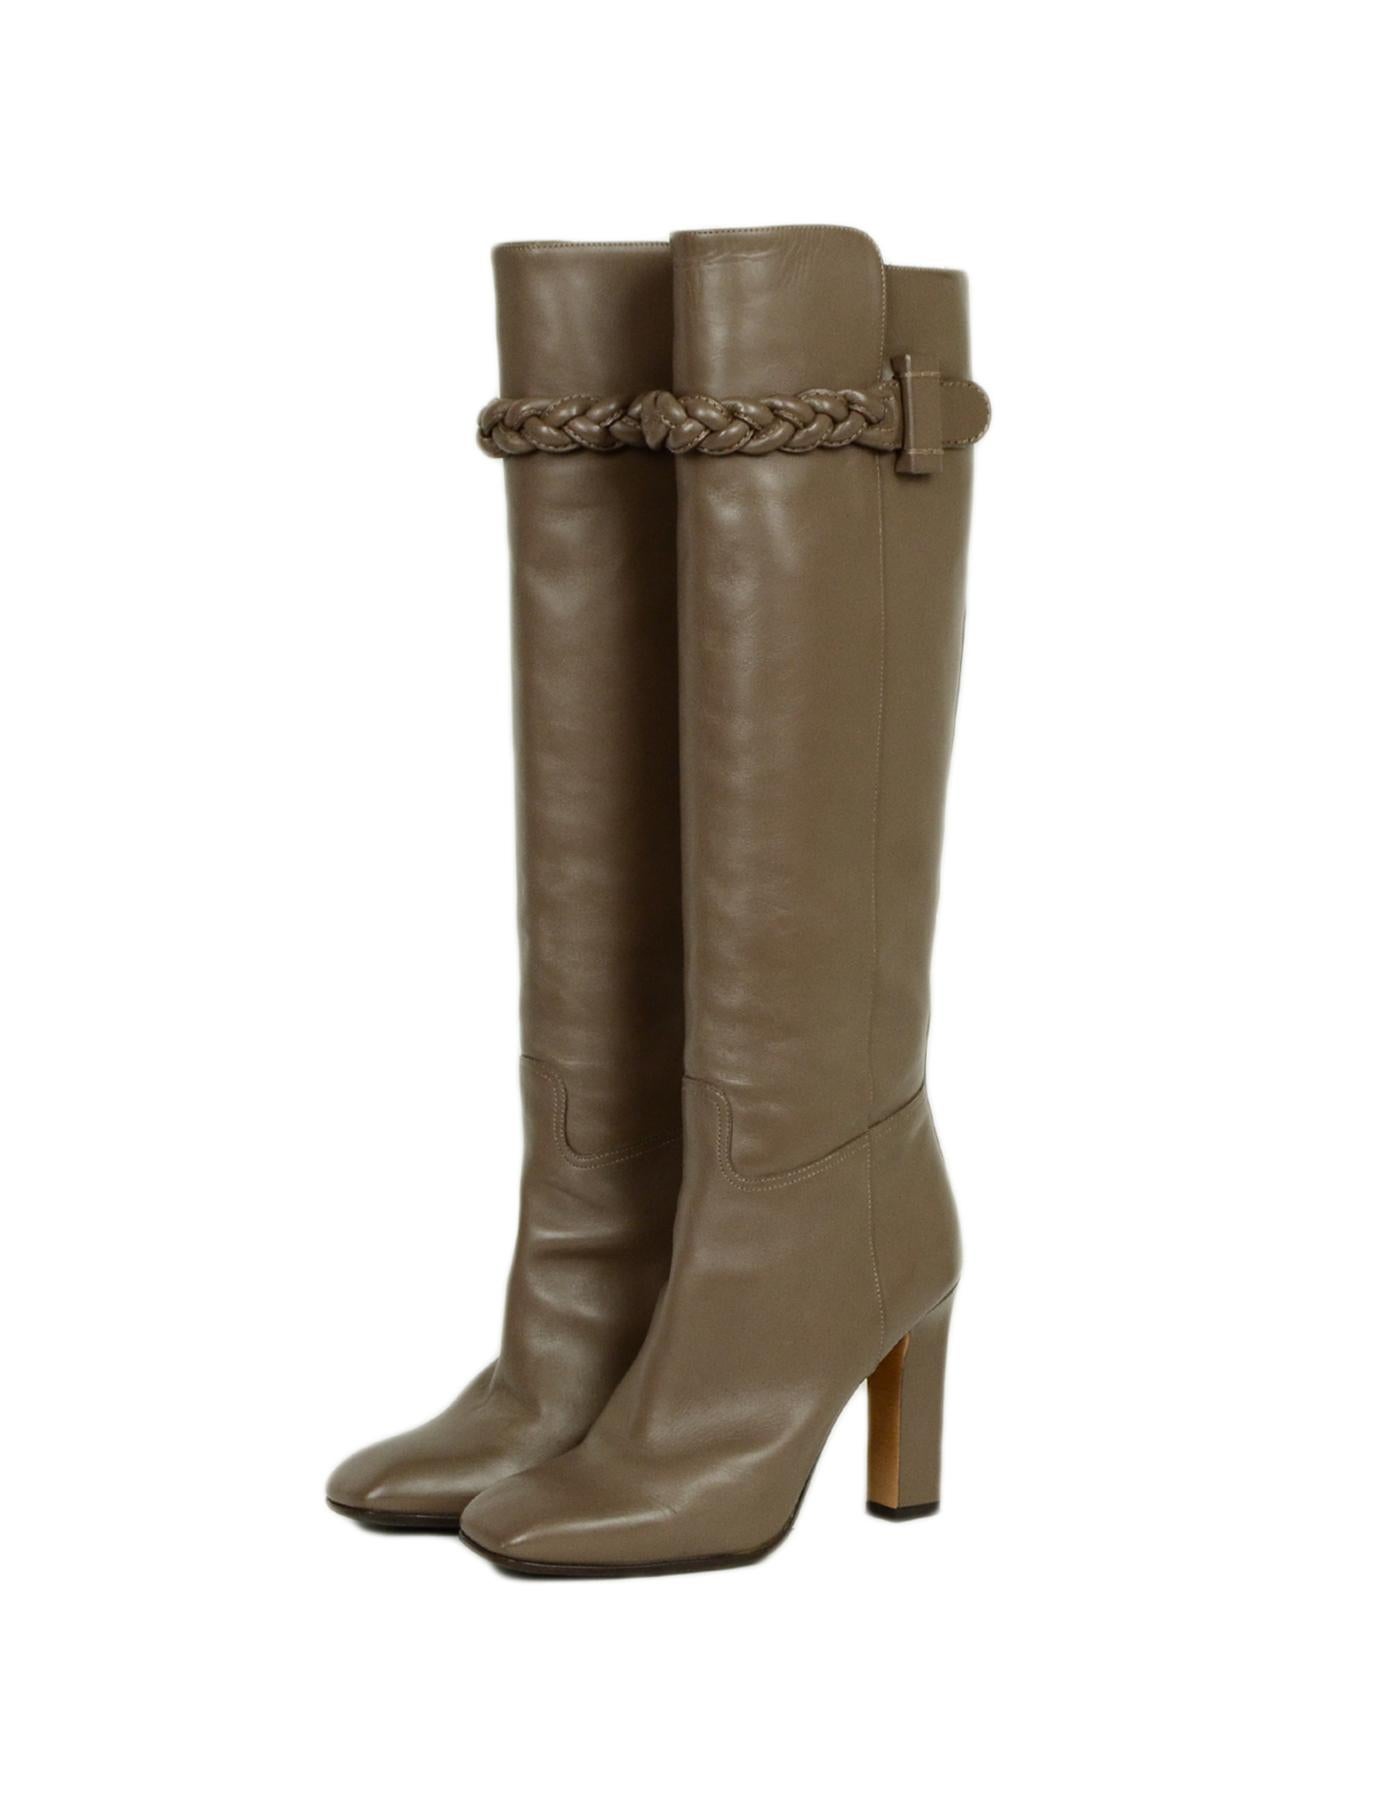 Valentino Taupe Leather Knee-High Boots w/ Braided Trim sz 37.5

Made In: Italy
Color: Taupe 
Materials: Leather
Closure/Opening: Slip-on 
Overall Condition: Excellent pre-owned condition, with the exception of some light scratches on the leather